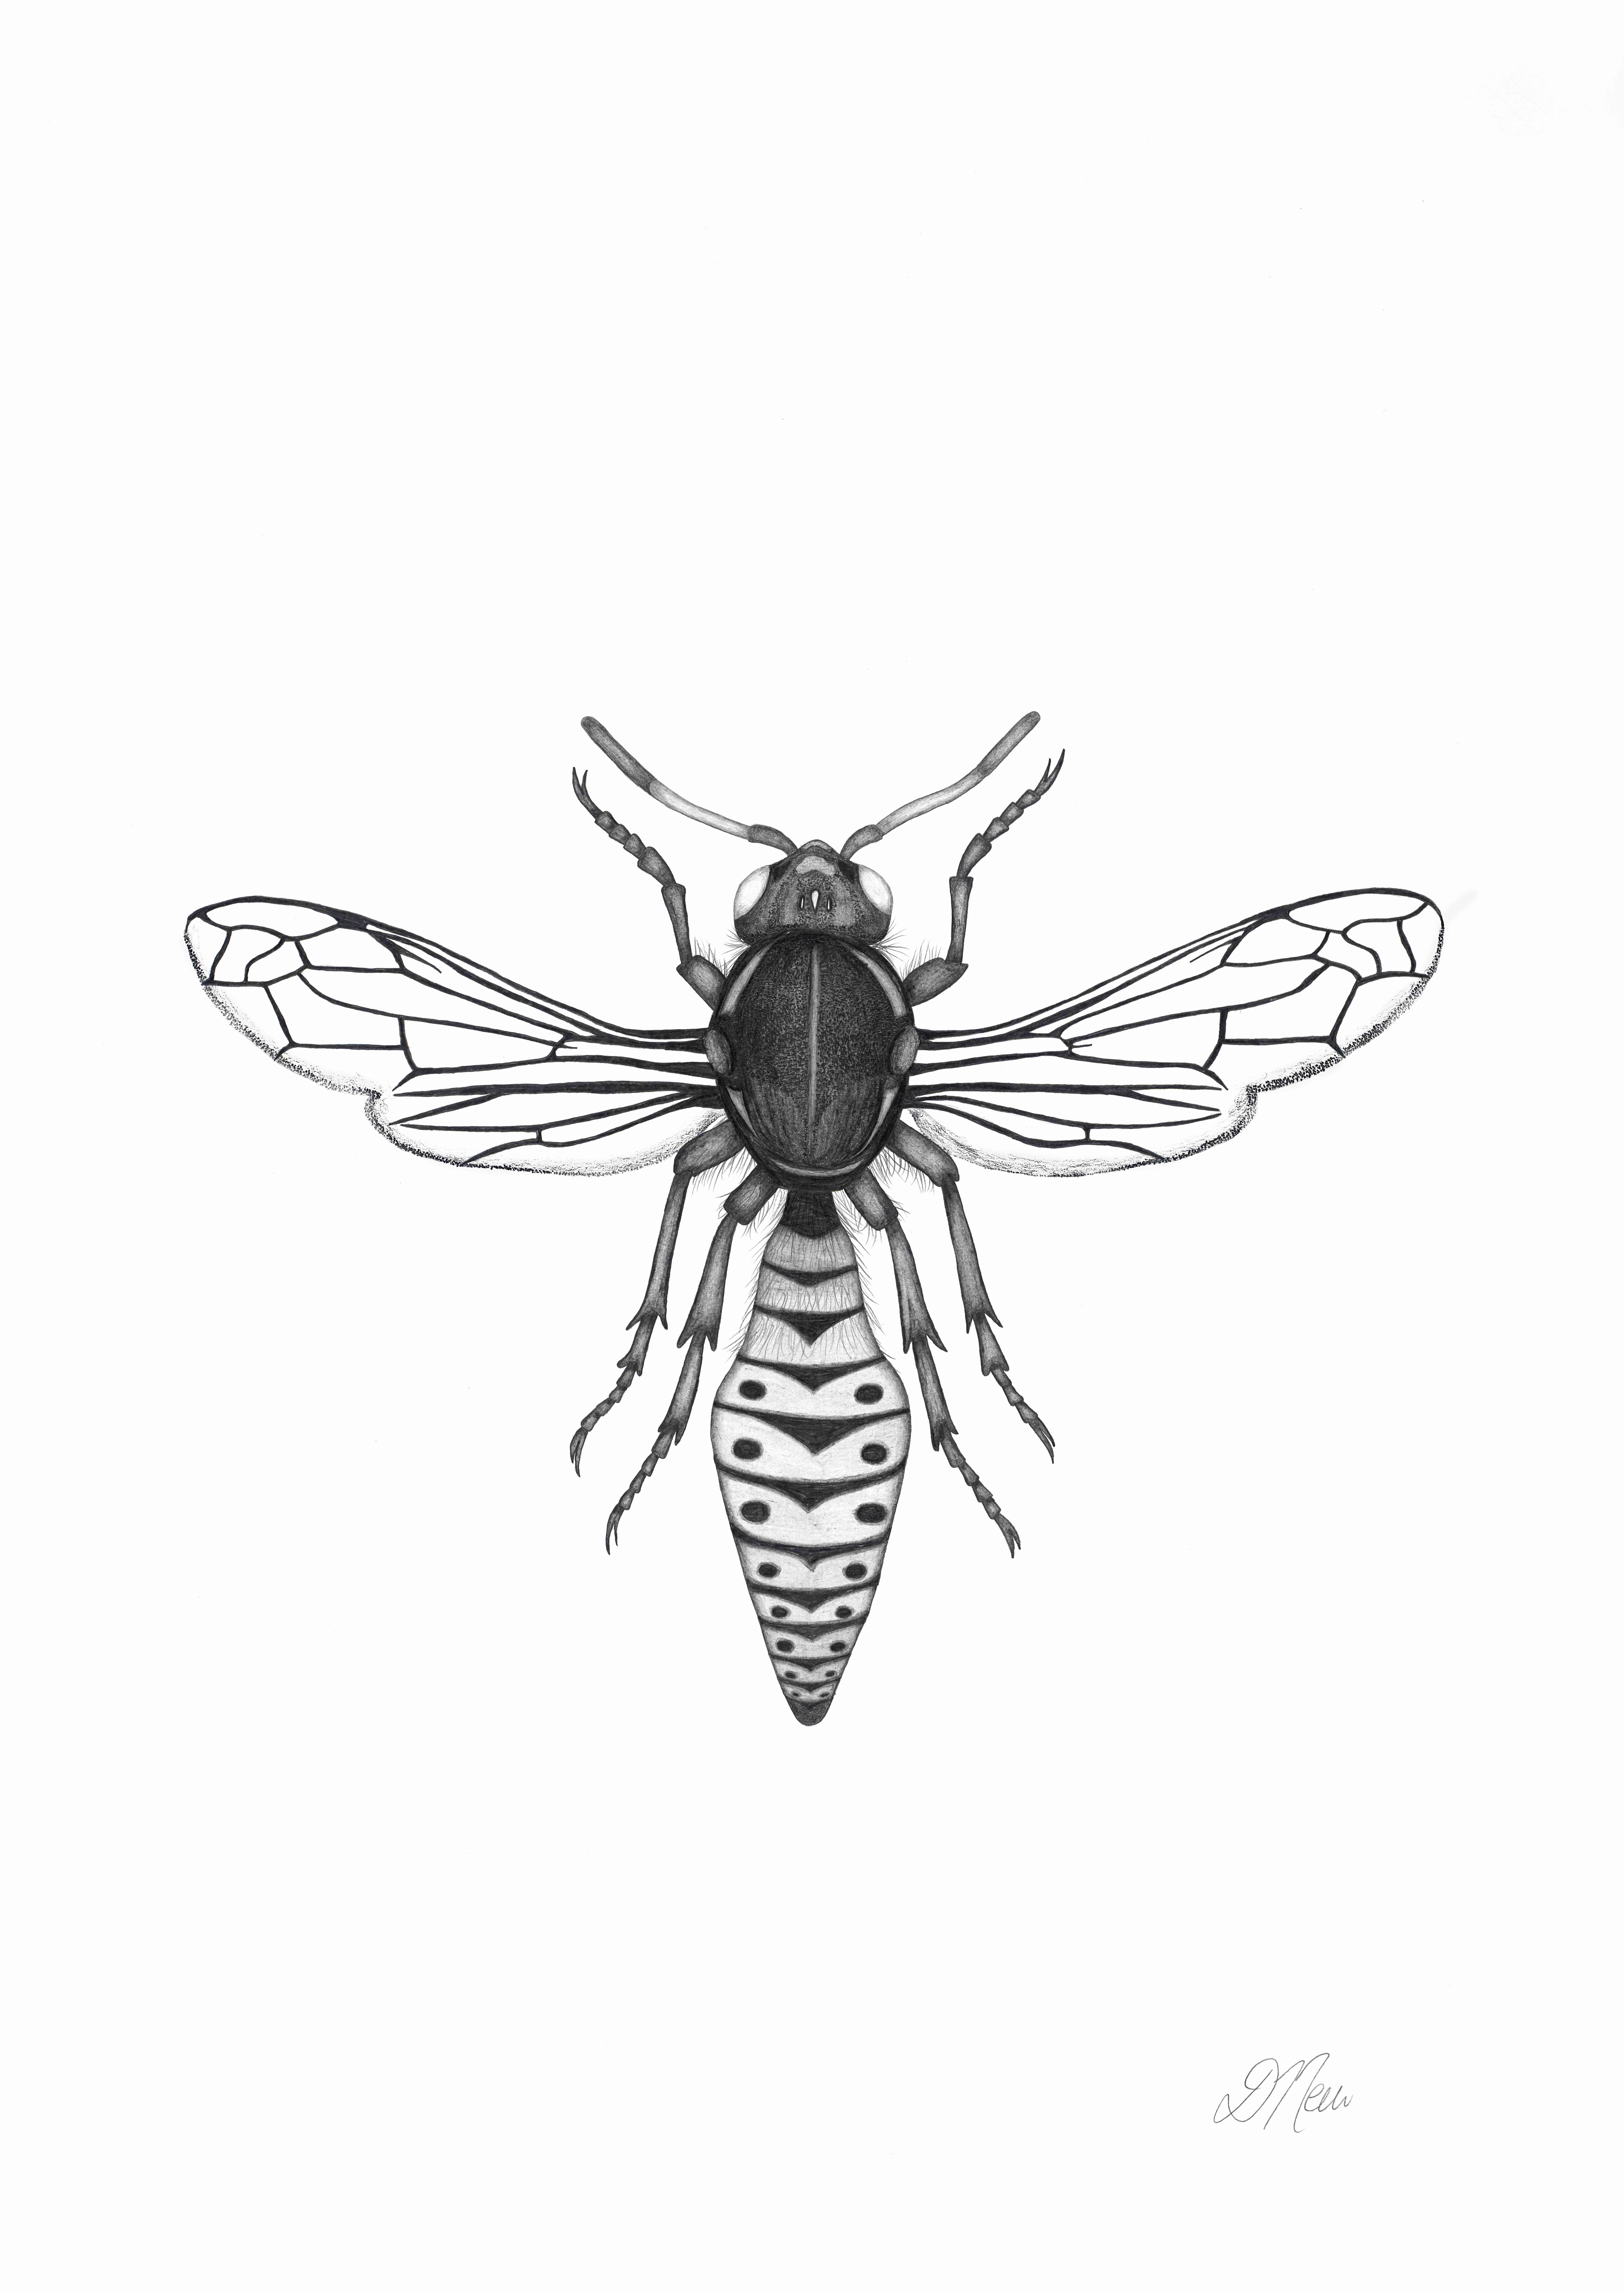 Wasp 2 | Pencil Drawing by Debbie New